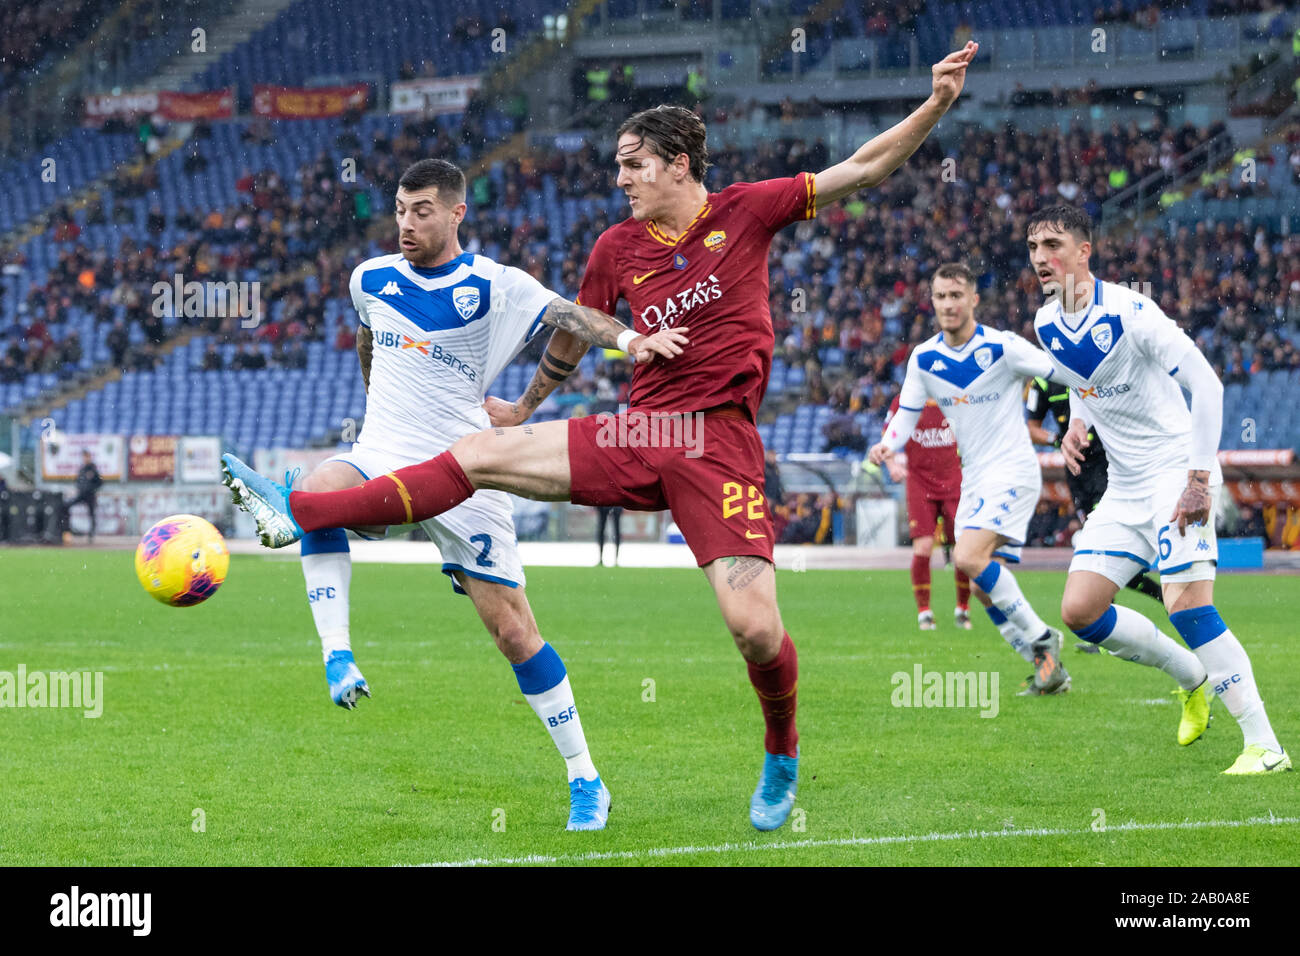 Nicolò Zanilo of AS Roma seen in action during the Italian Serie A football match between AS Roma and Brescia at the Olympic Stadium in Rome.(Final score; AS Roma 3:0 Brescia) Stock Photo